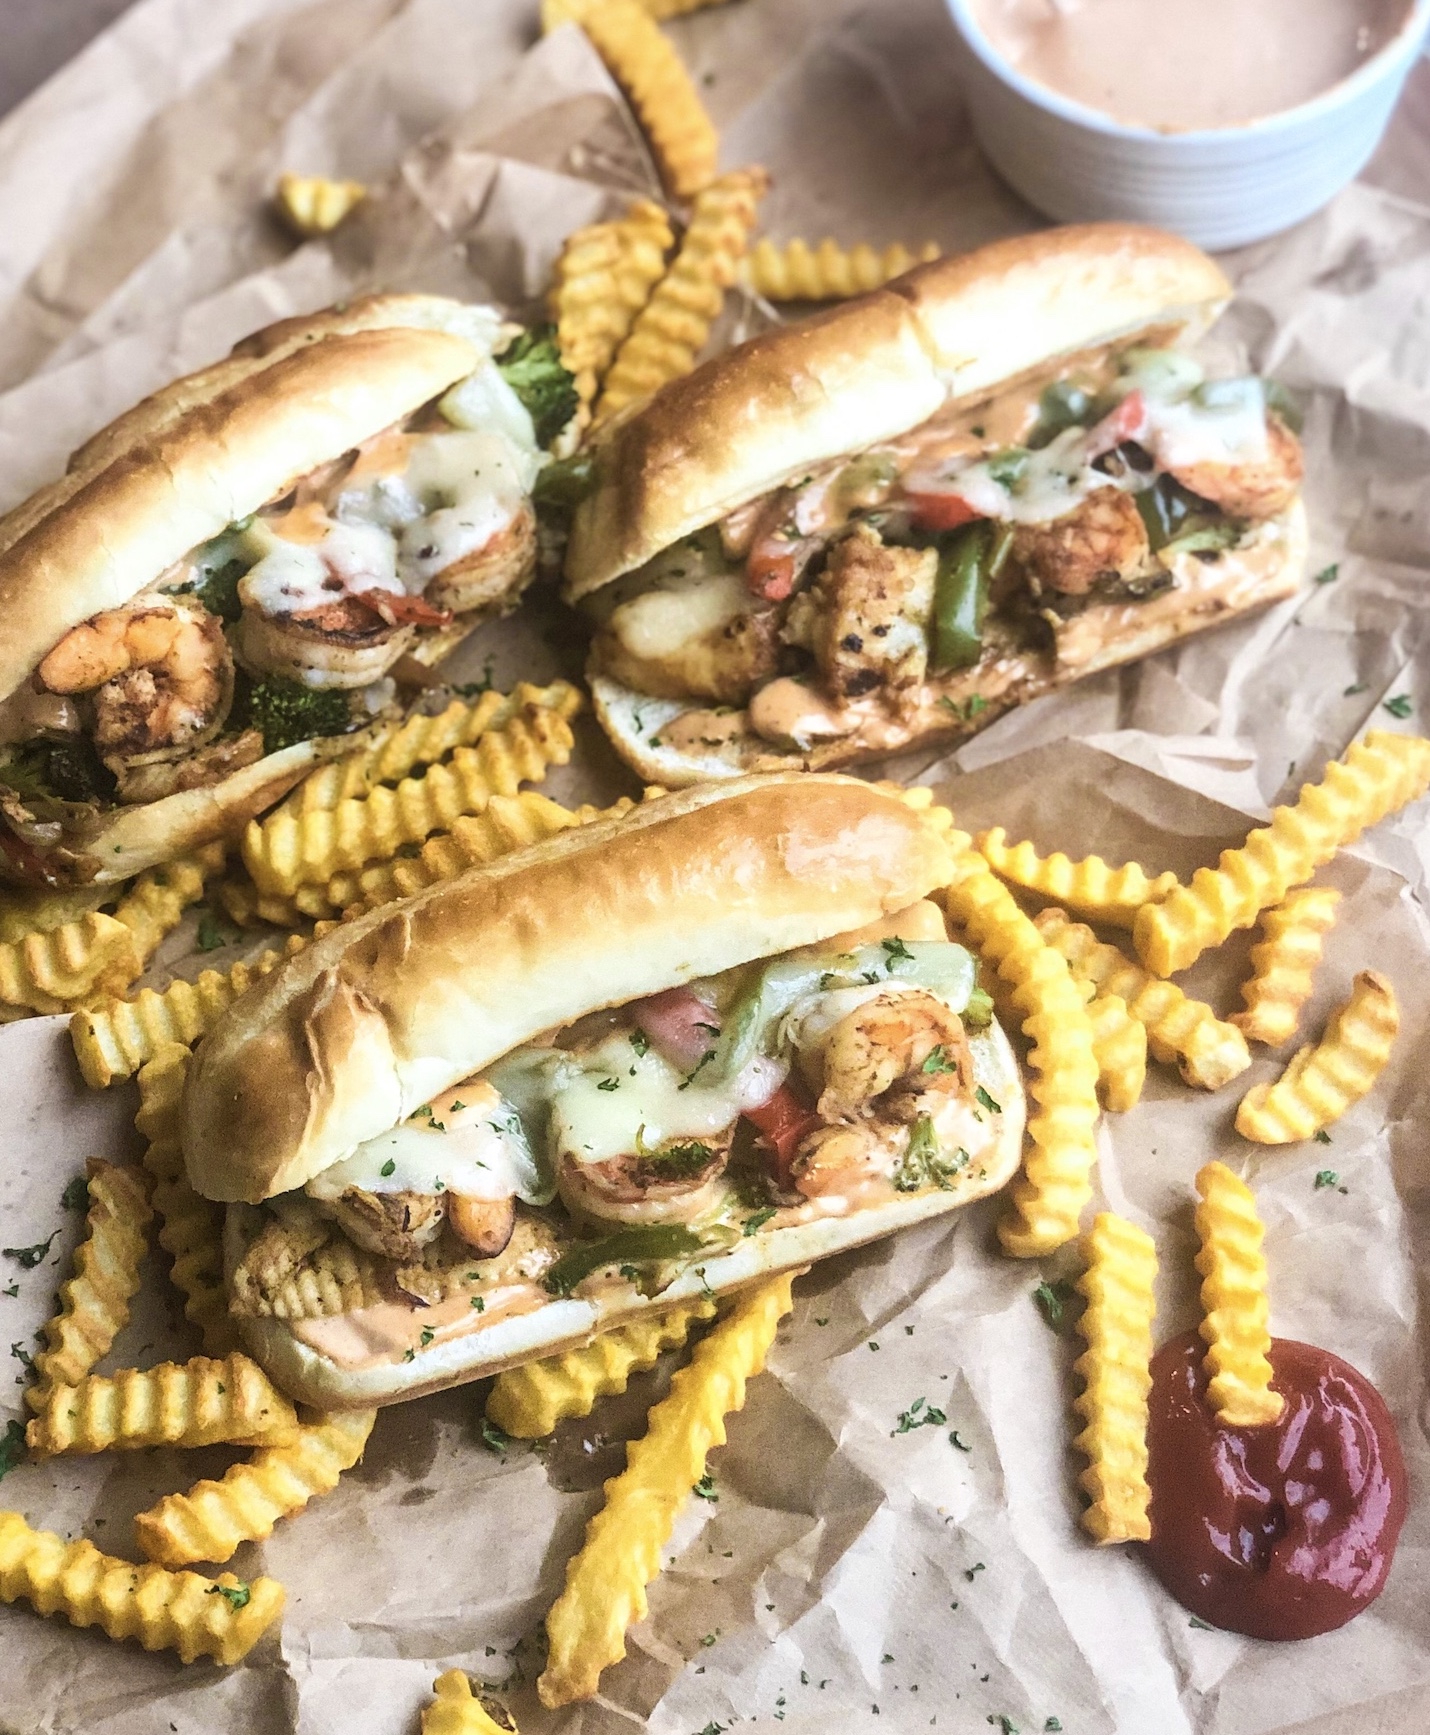 Three Seafood Cheesesteaks with Remoulade Sauce and sauteed veggies. Styled with crinkle cut fries, ketchup and remoulade sauce in a sauce cup.